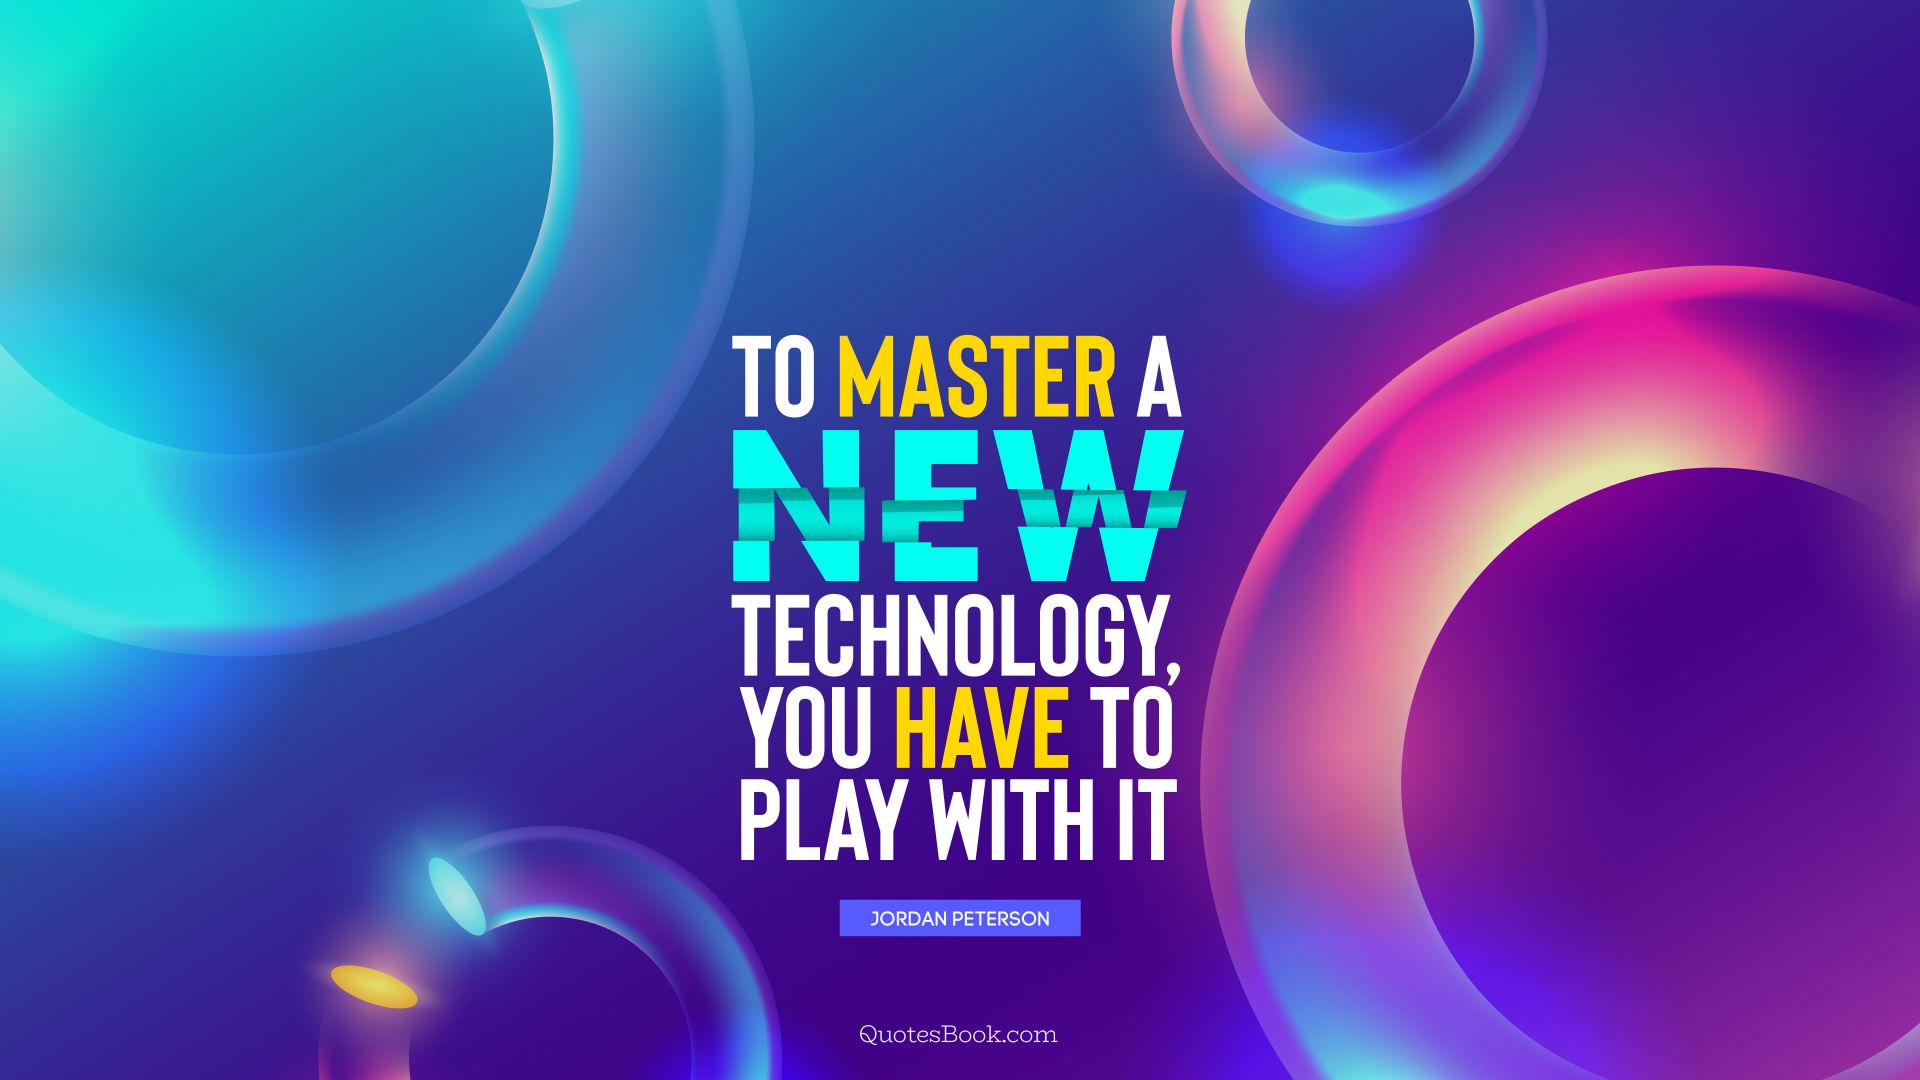 To master a new technology, you have to play with it. - Quote by Jordan Peterson